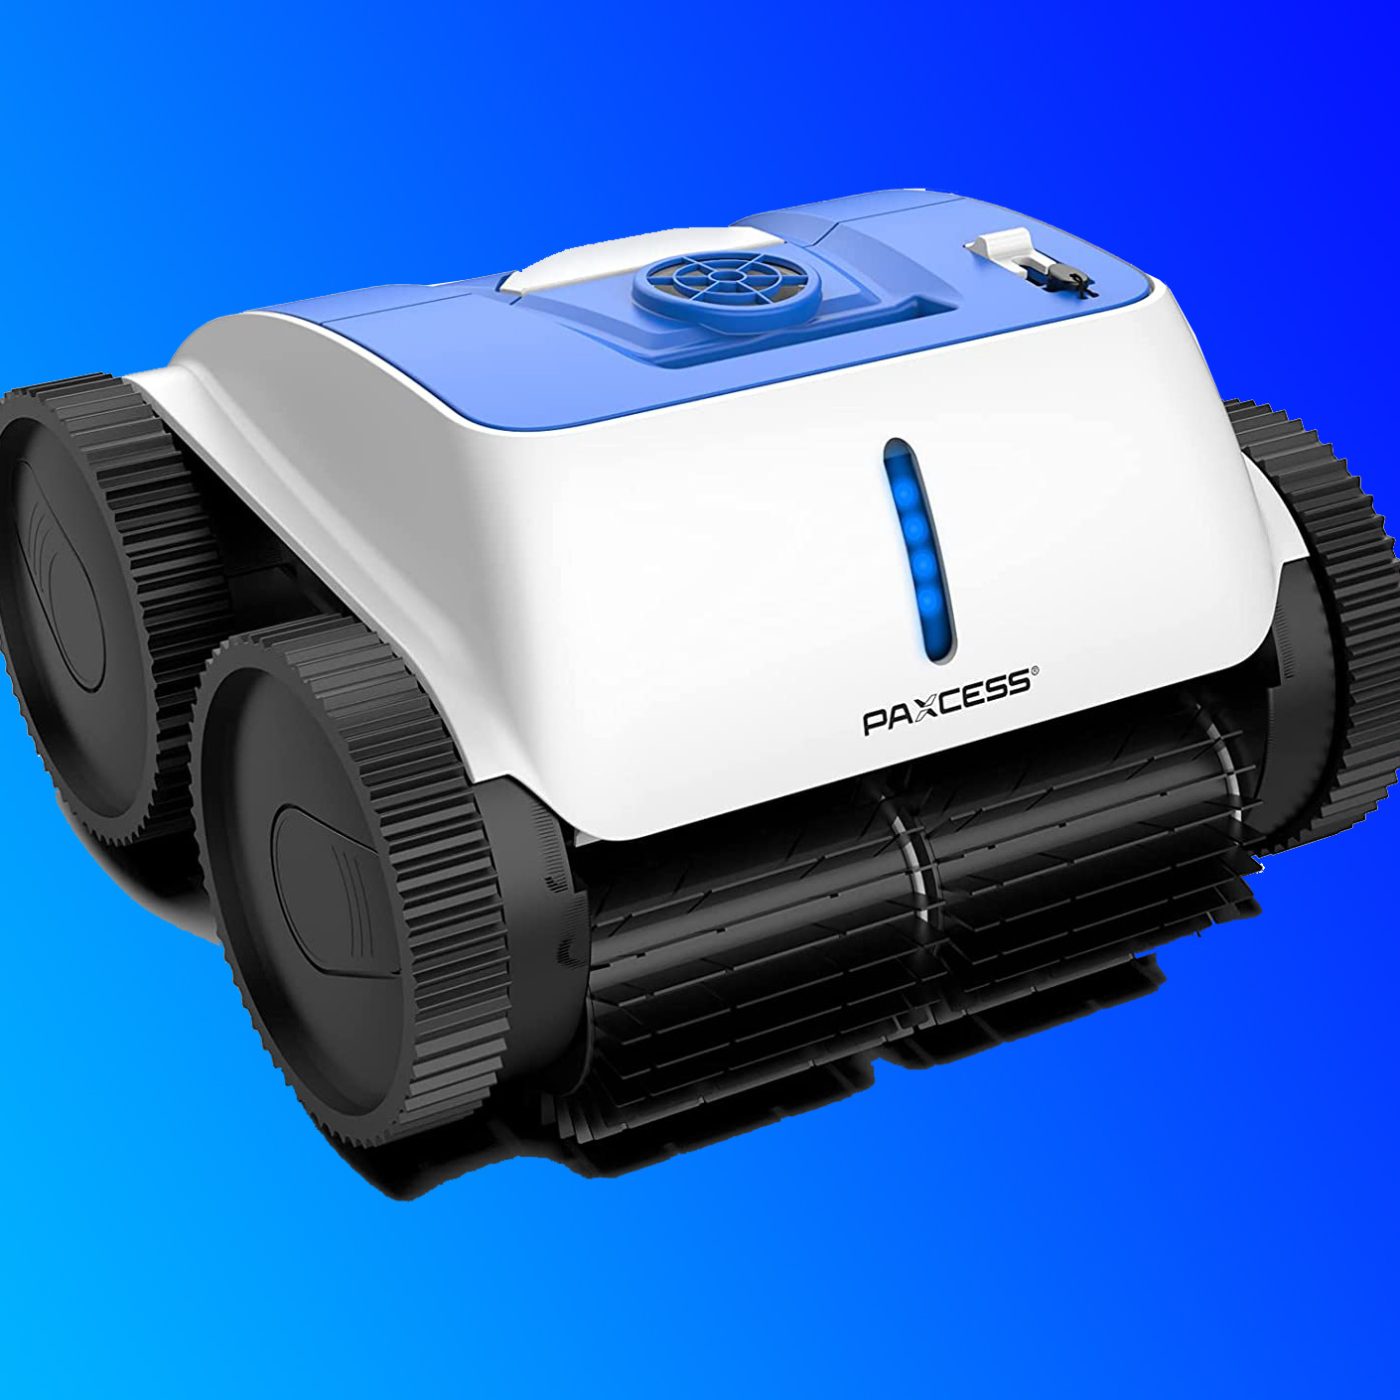 Best pool cleaner robot deals: Hassle-free pool cleaning for $299